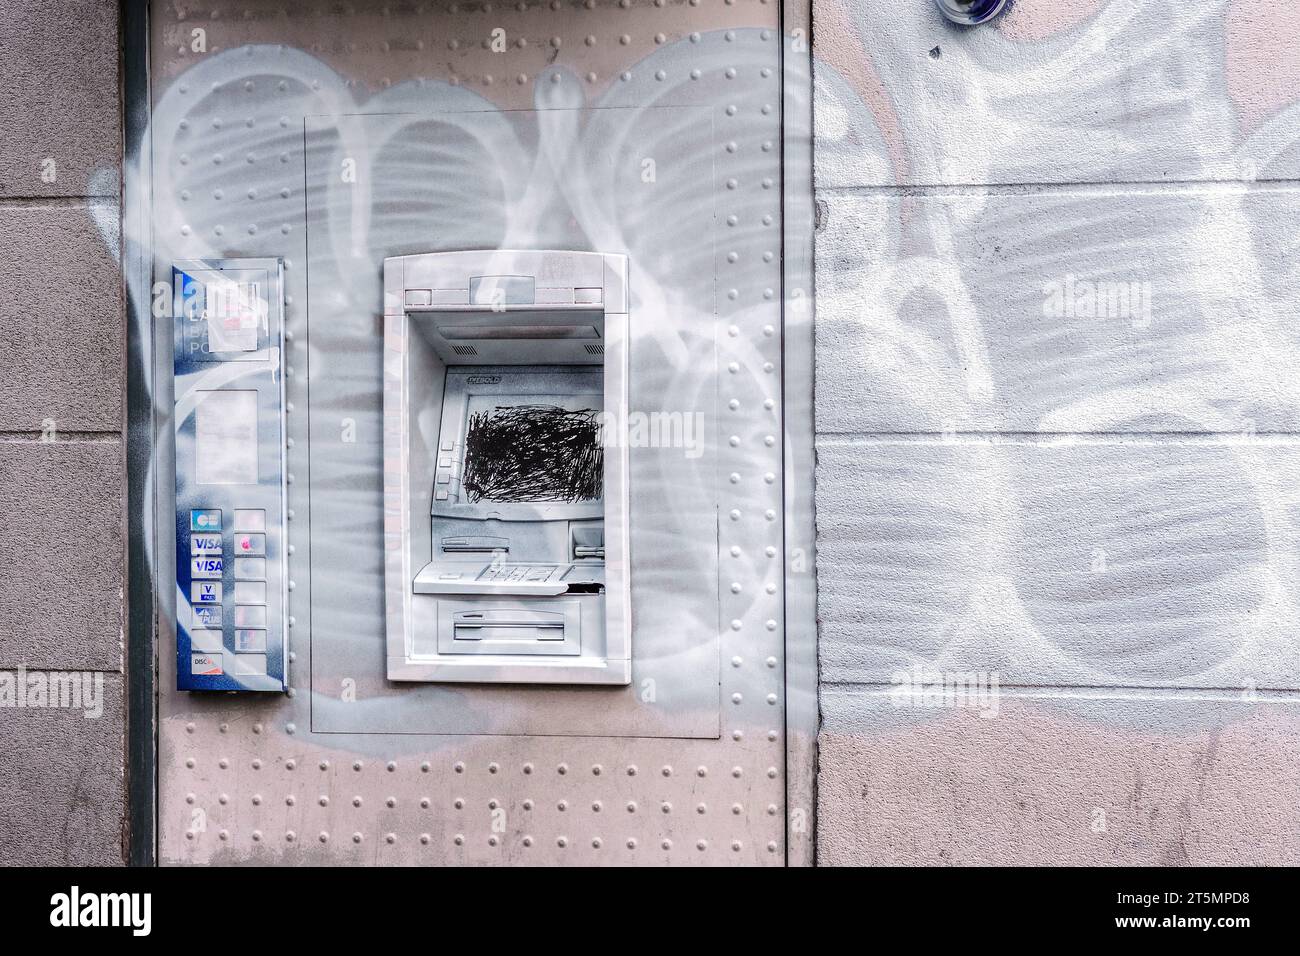 La Poste (French post office) cash distributor vandalised with white spray paint - Belleville, Paris 20, France. Stock Photo